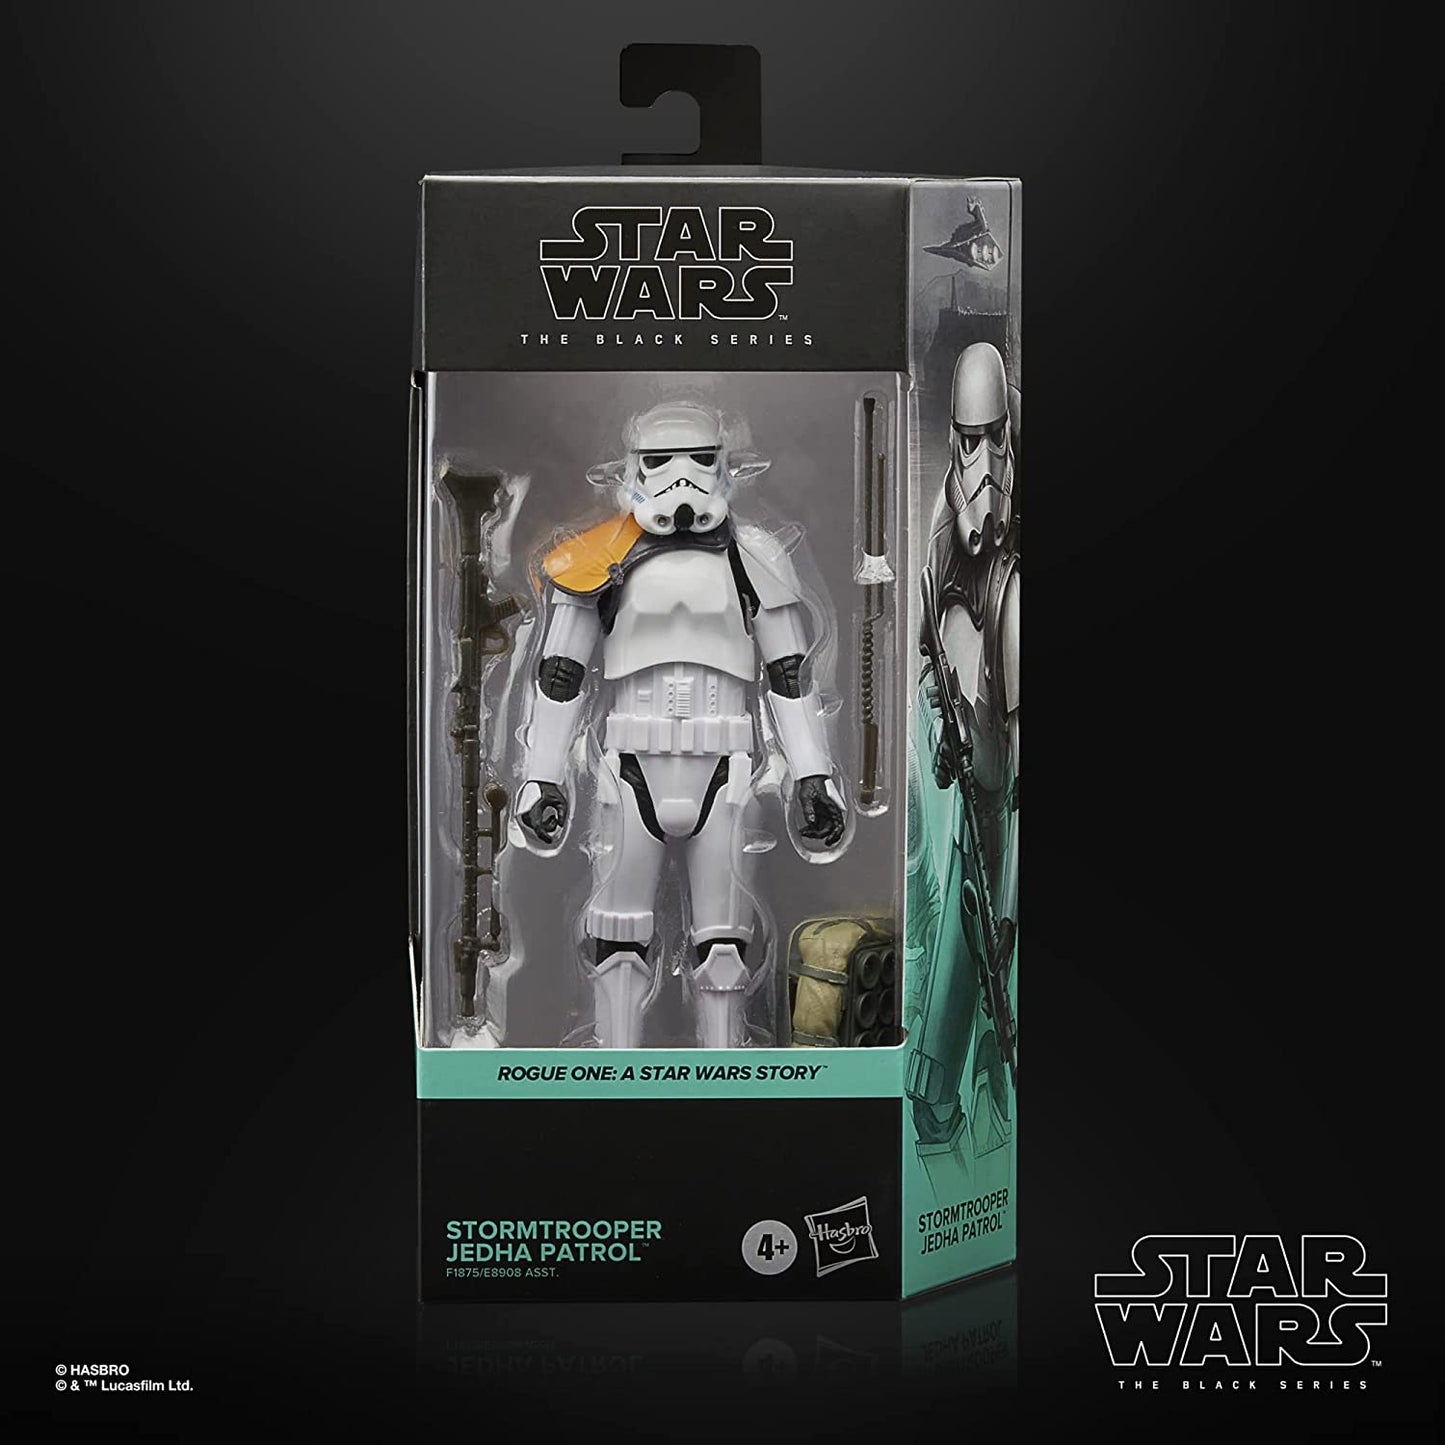 STAR WARS The Black Series Stormtrooper Jedha Patrol Toy 6-Inch-Scale Rogue One: A Story Collectible Figure